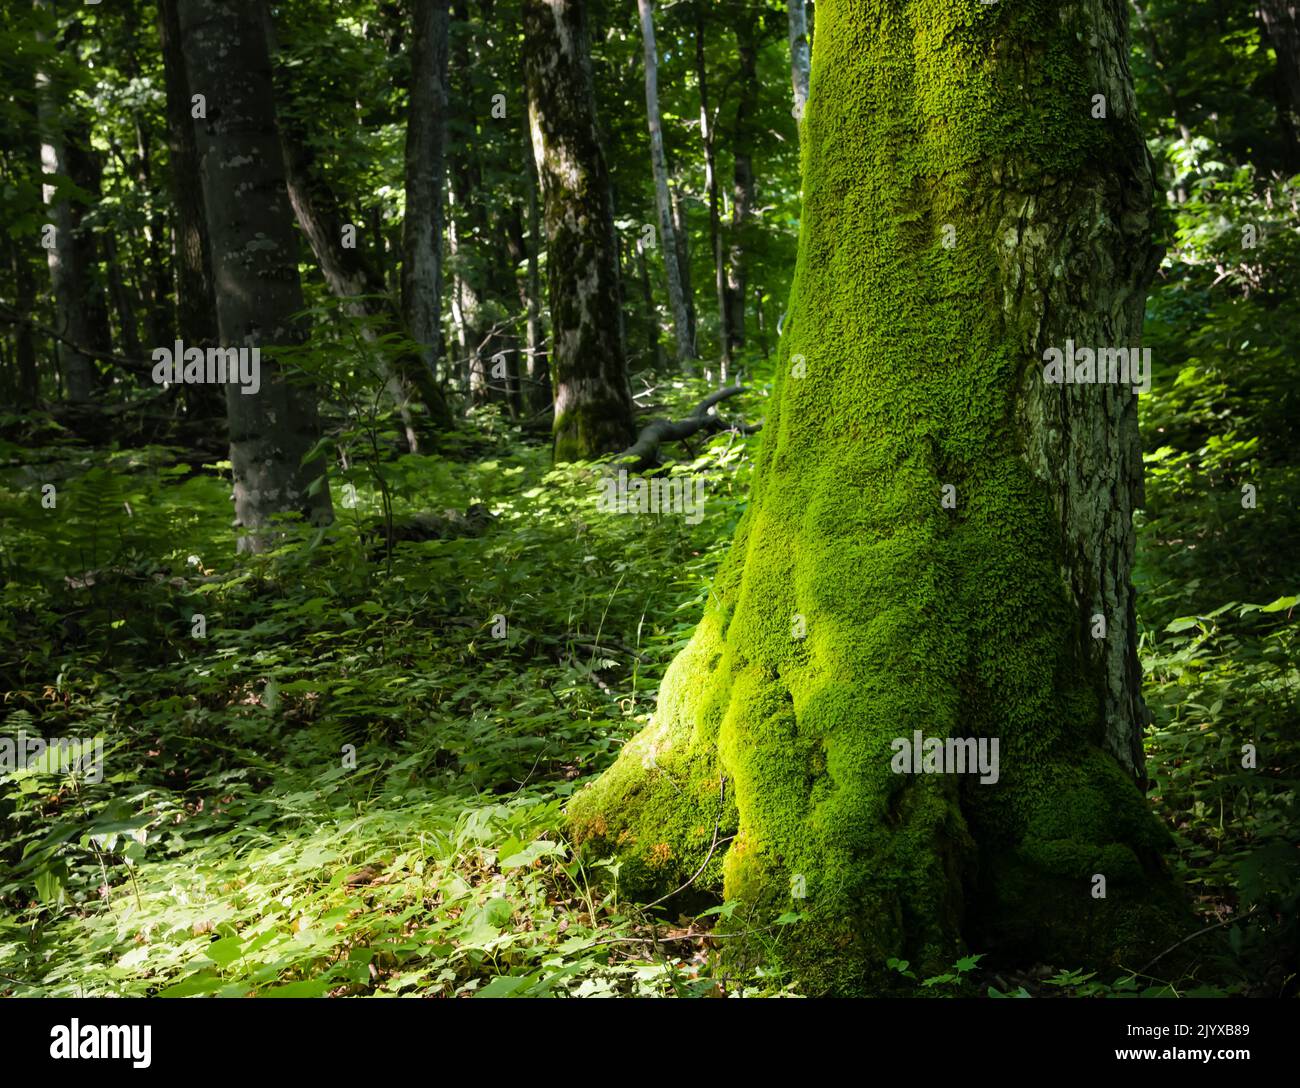 Tree covered in green moss in a forest, highlighted by the sun Stock Photo